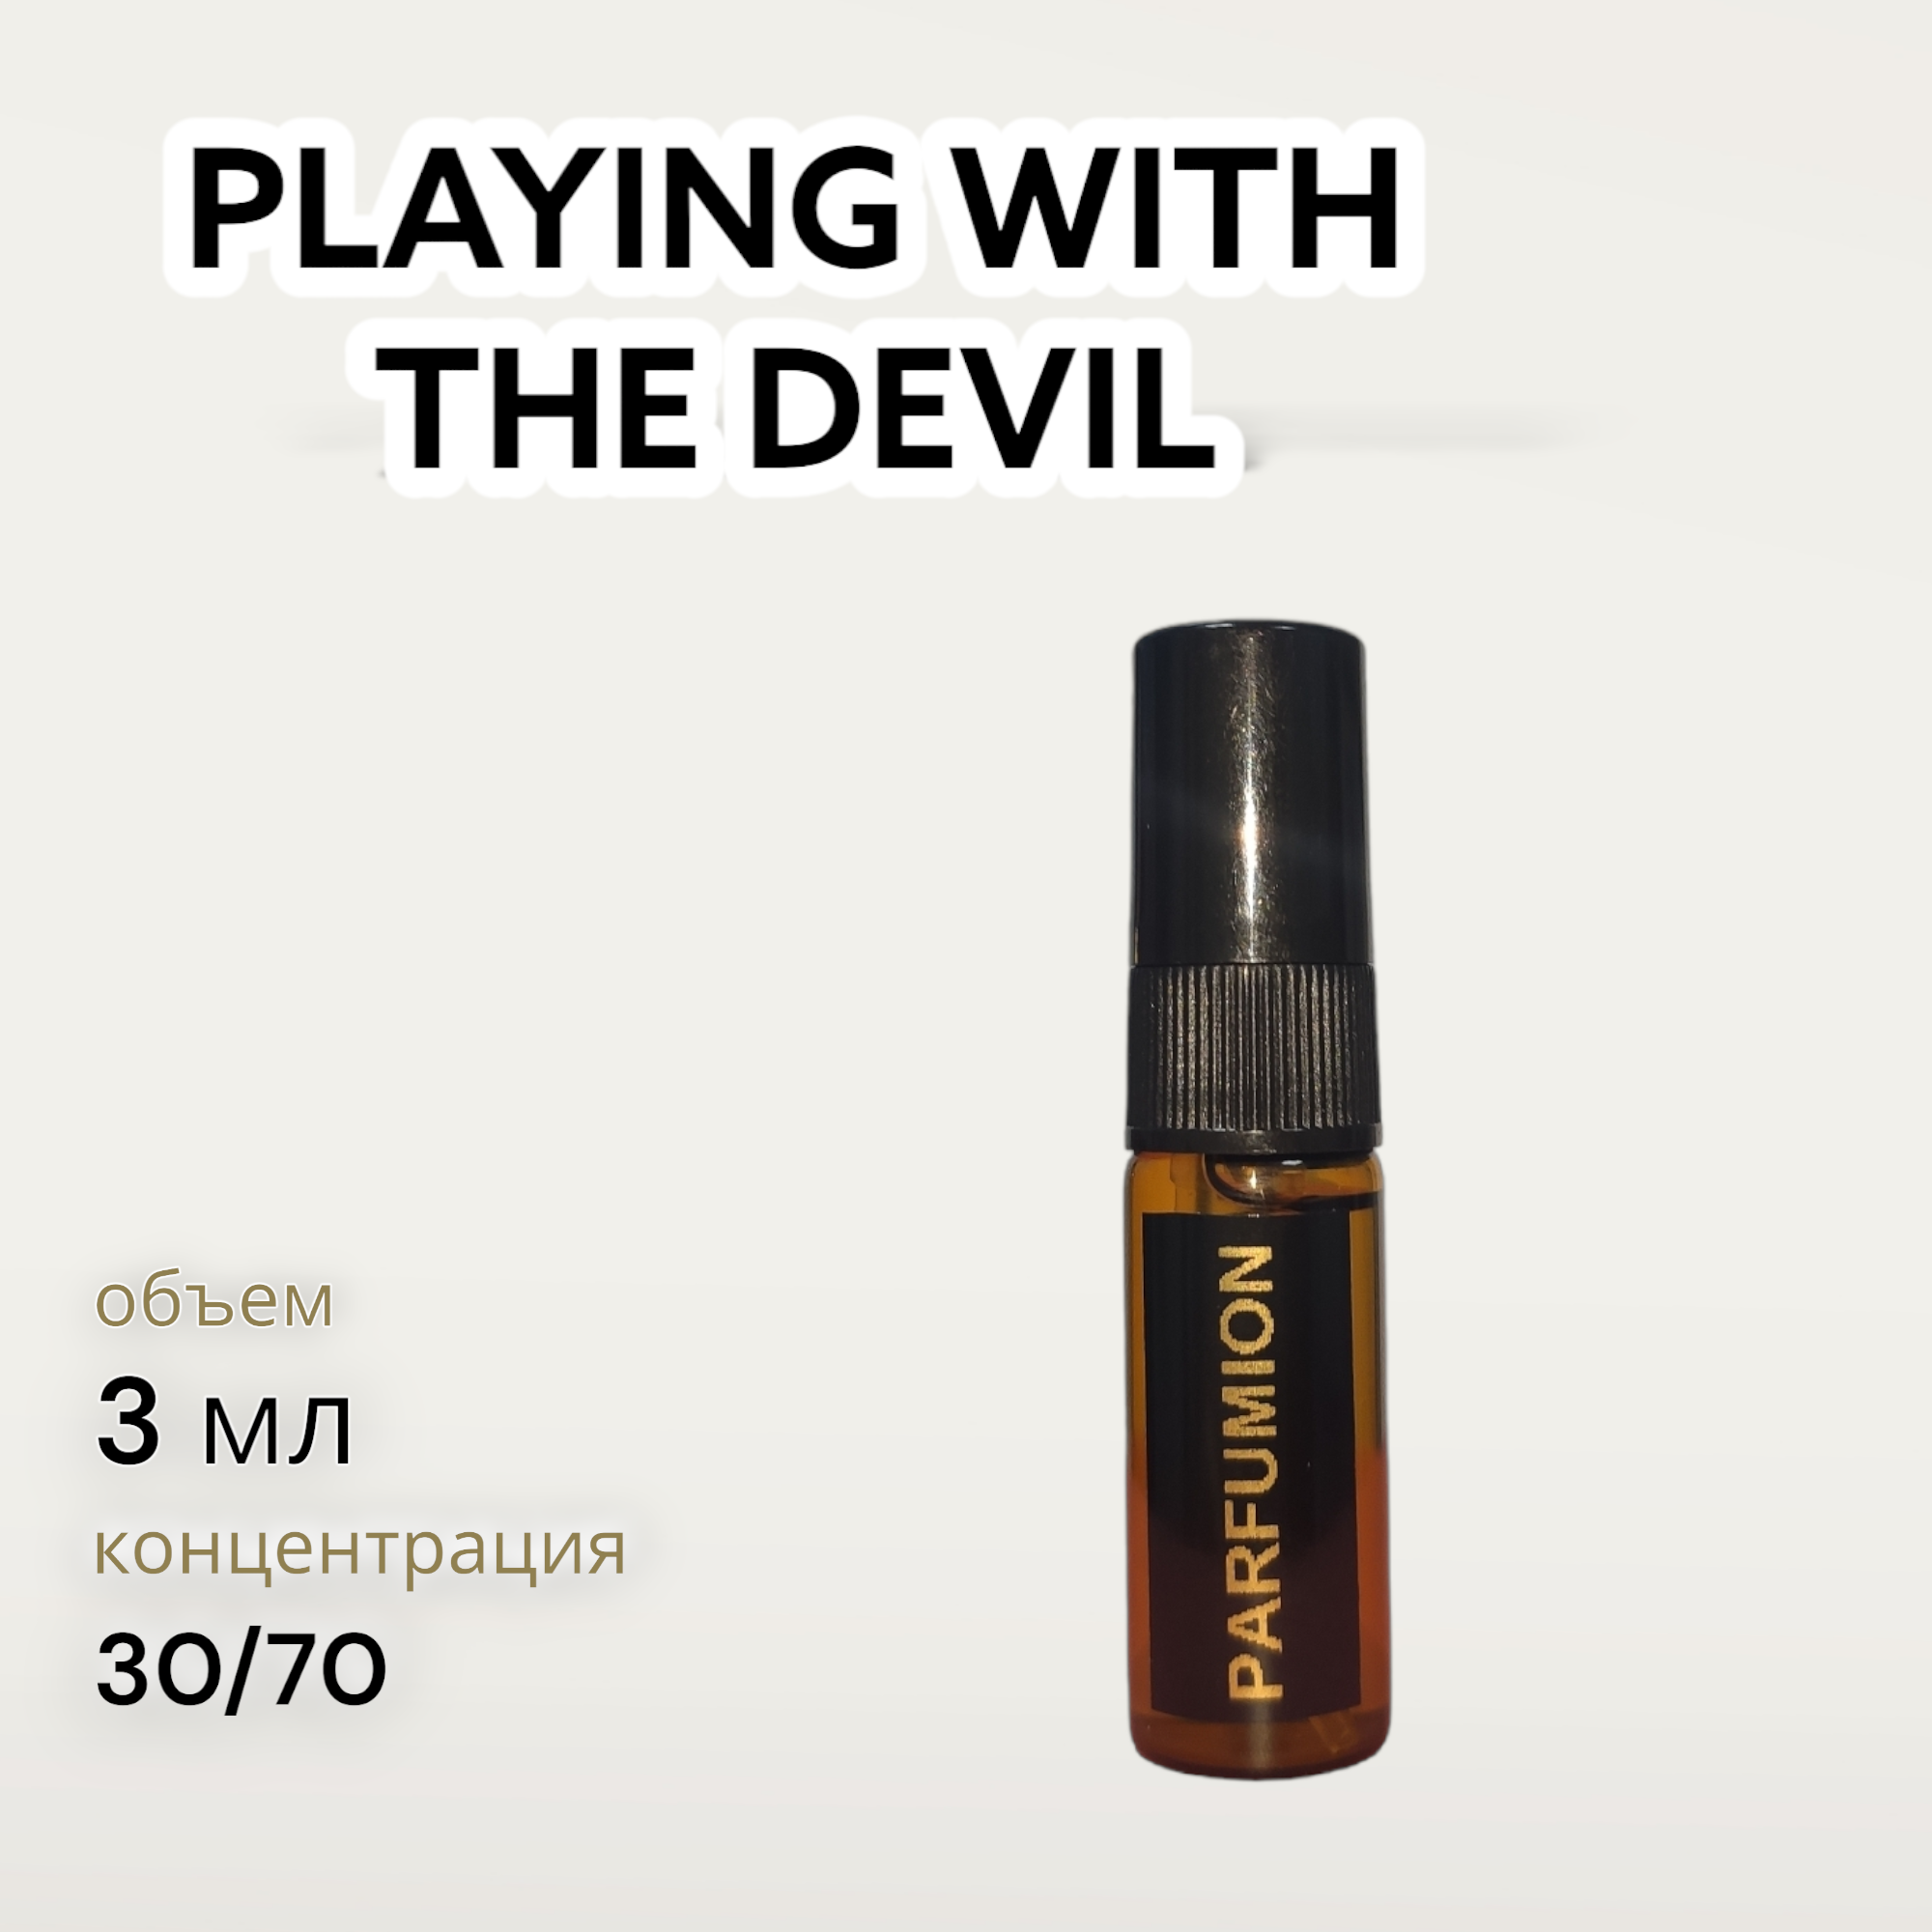 Духи "Playing With The Devil" от Parfumion